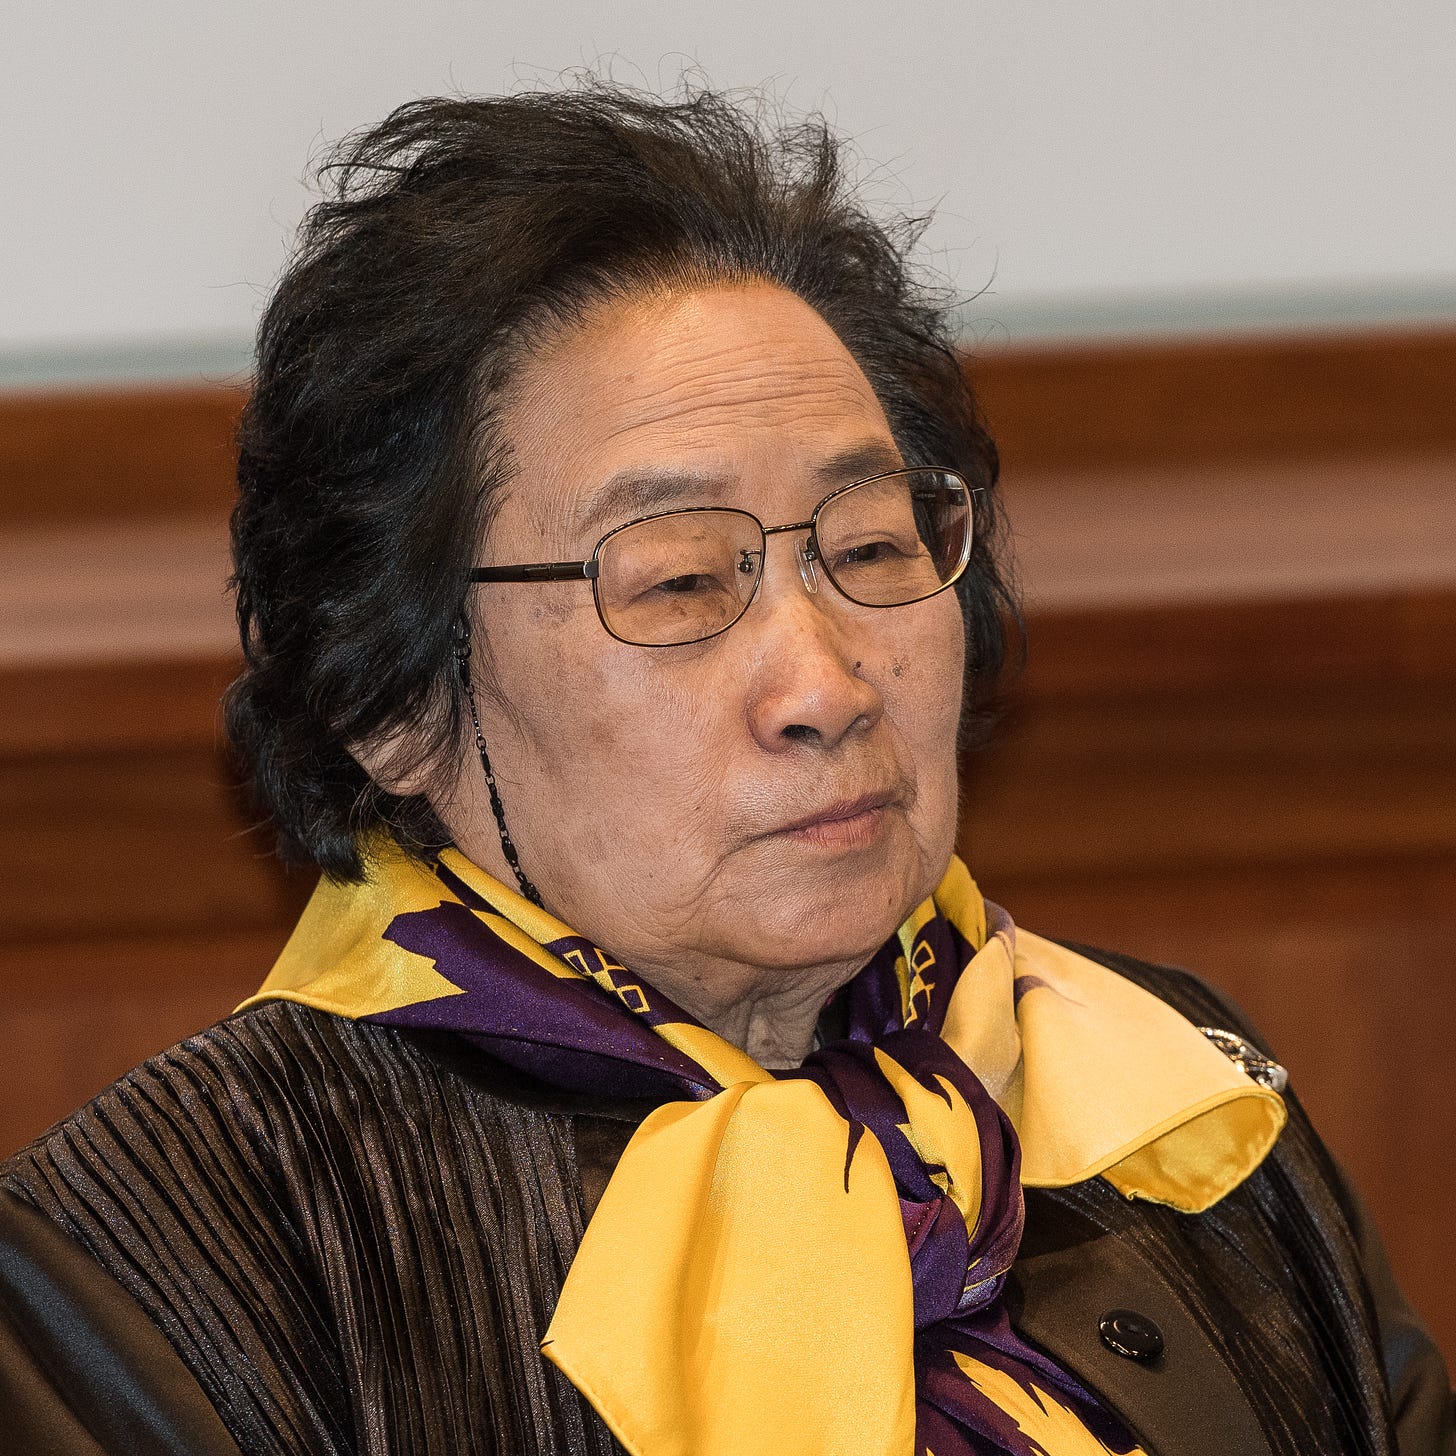 An image of Chinese scientist Tu Youyou in academic regalia seated at a table.